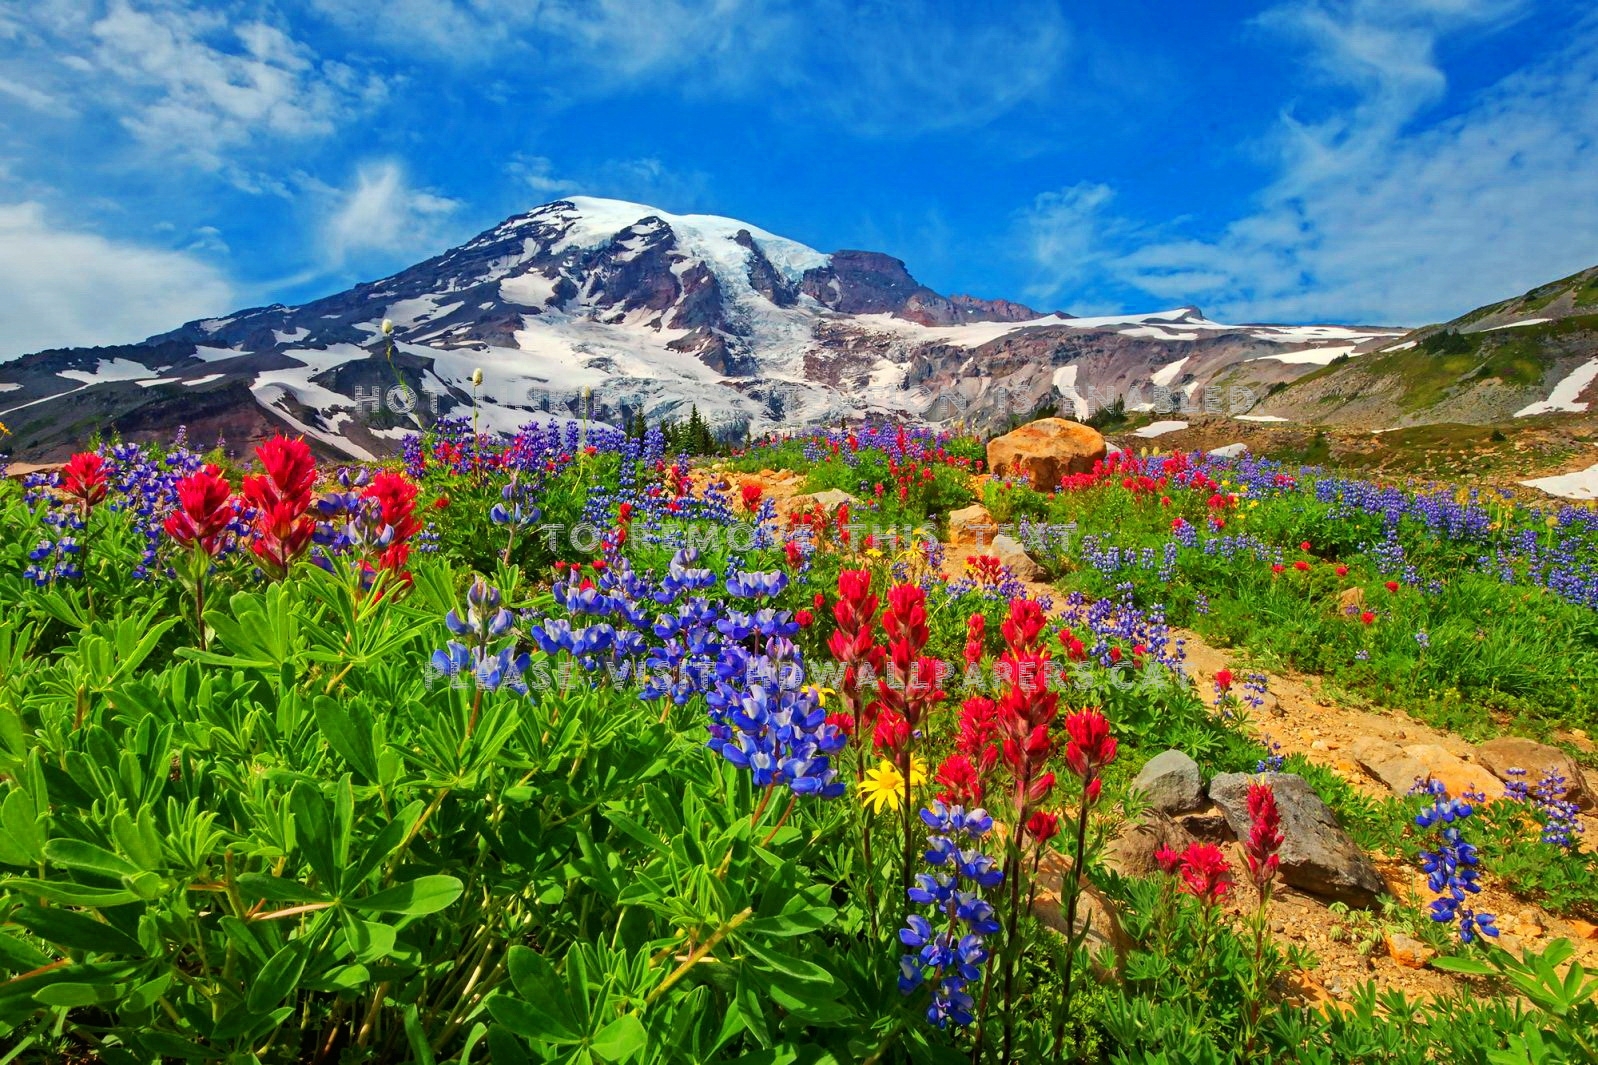 The Mountain Wildflowers wallpaper Gallery